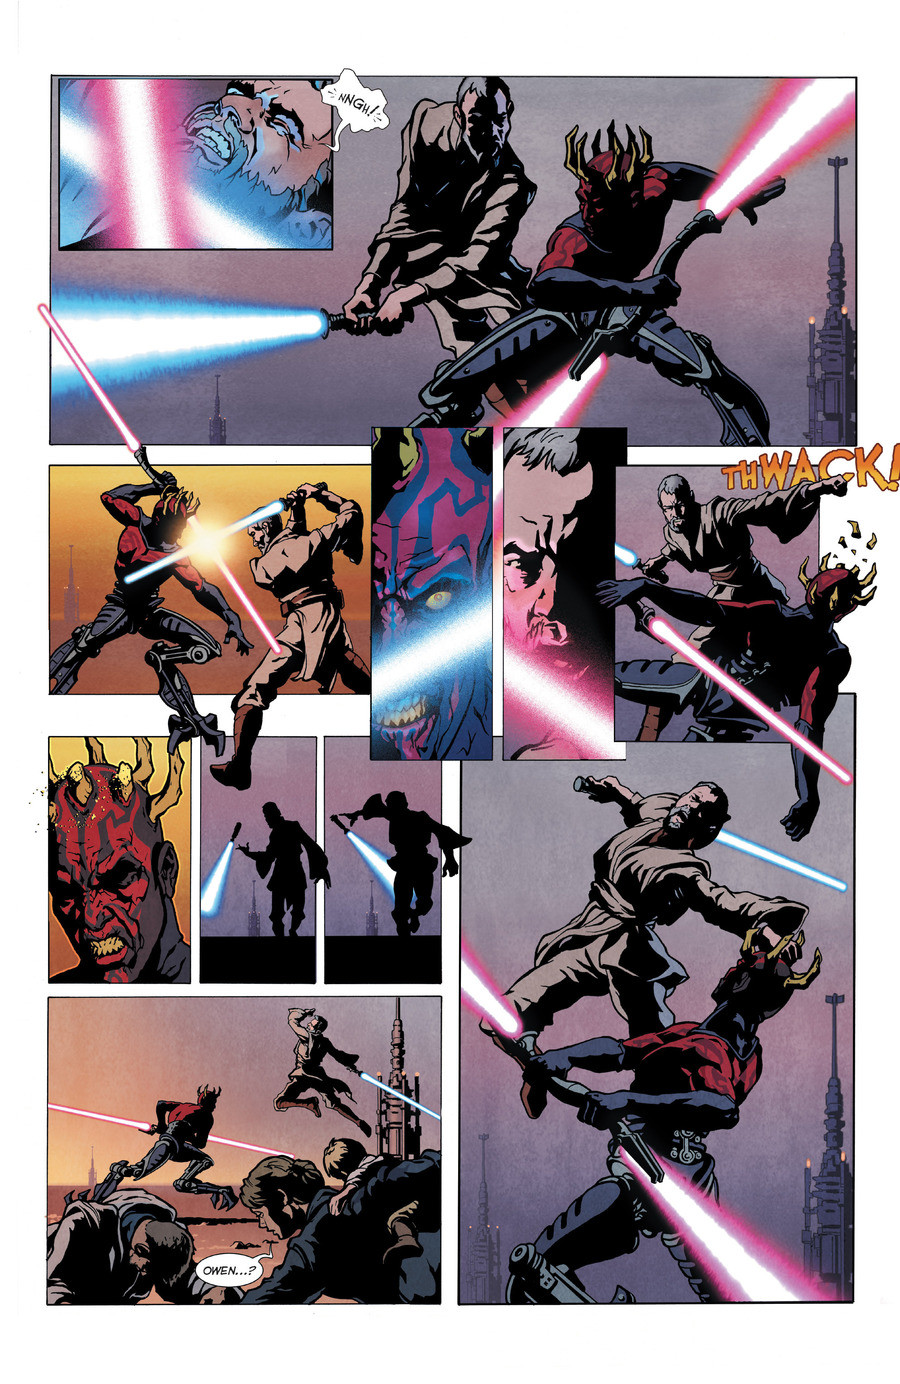 Old Wounds. Source is Star Wars Visionaries. join list: StarWars (4 subs)Mention History .. Is this cannon? If so, it would be pretty anti-climatic for someone like maul to just die after like 5 pages of a comic. Pretty sure this comic was made specifi